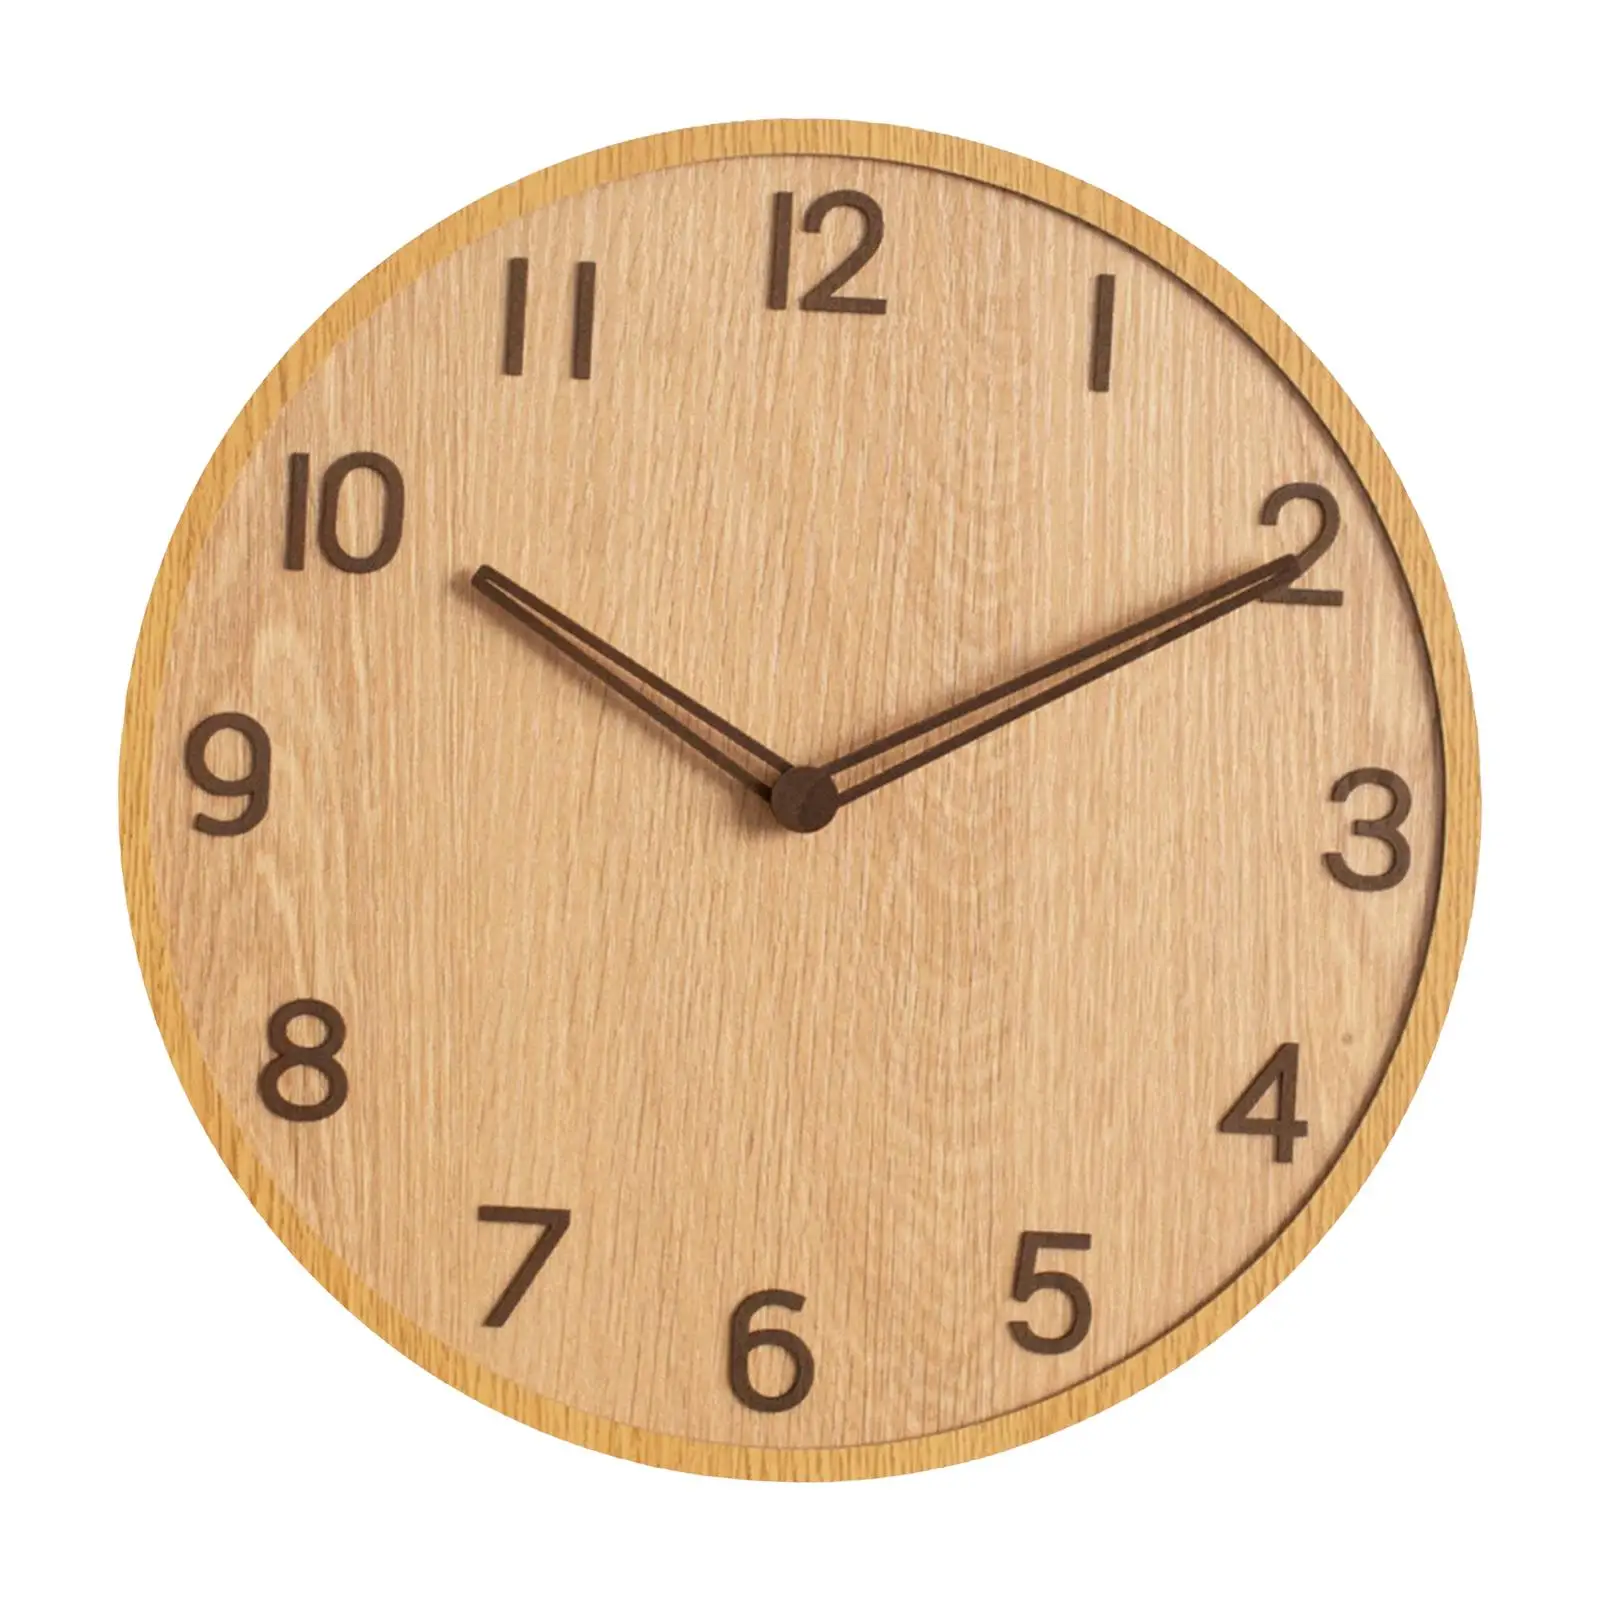 30cm Wooden Wall Clock Decorative Art Round Silent Silent Sweep for Home Kitchen School Indoor Office